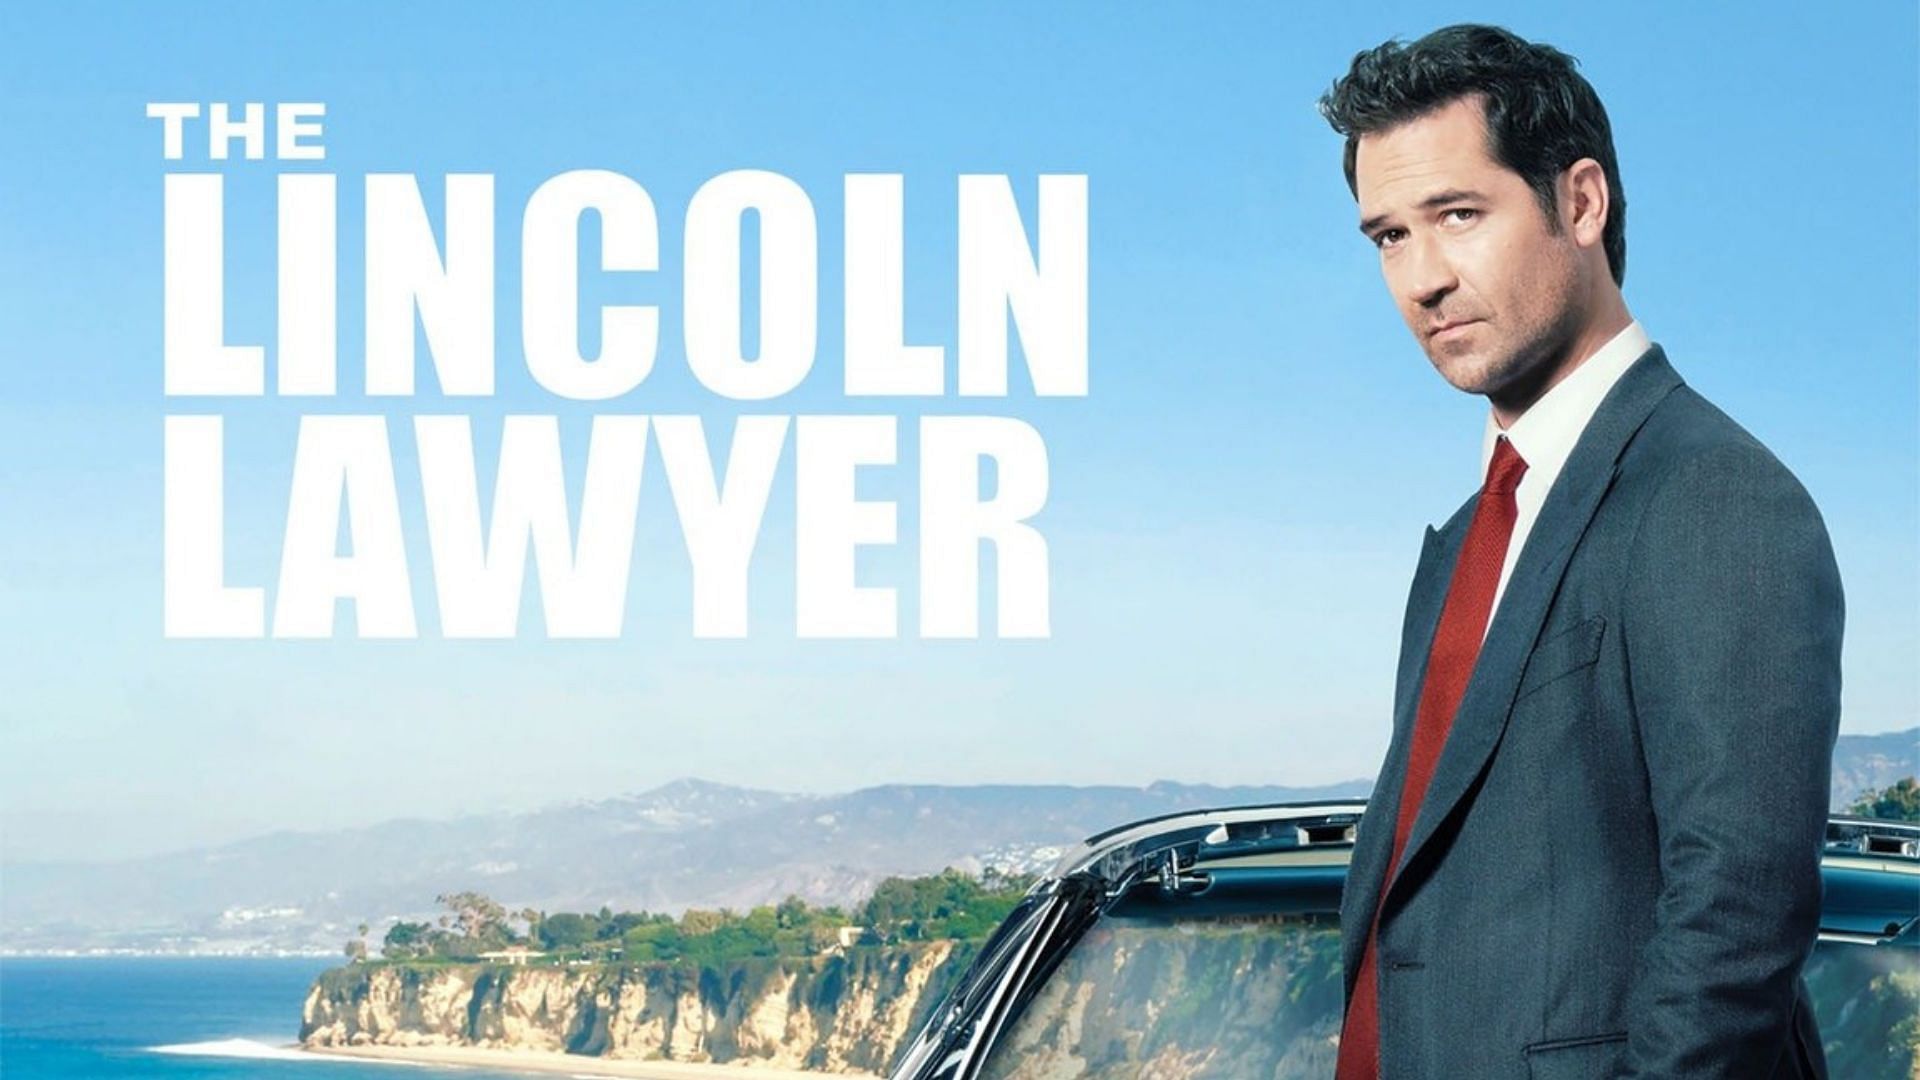 Poster for The Lincoln Lawyer (Image Via Rotten Tomatoes)